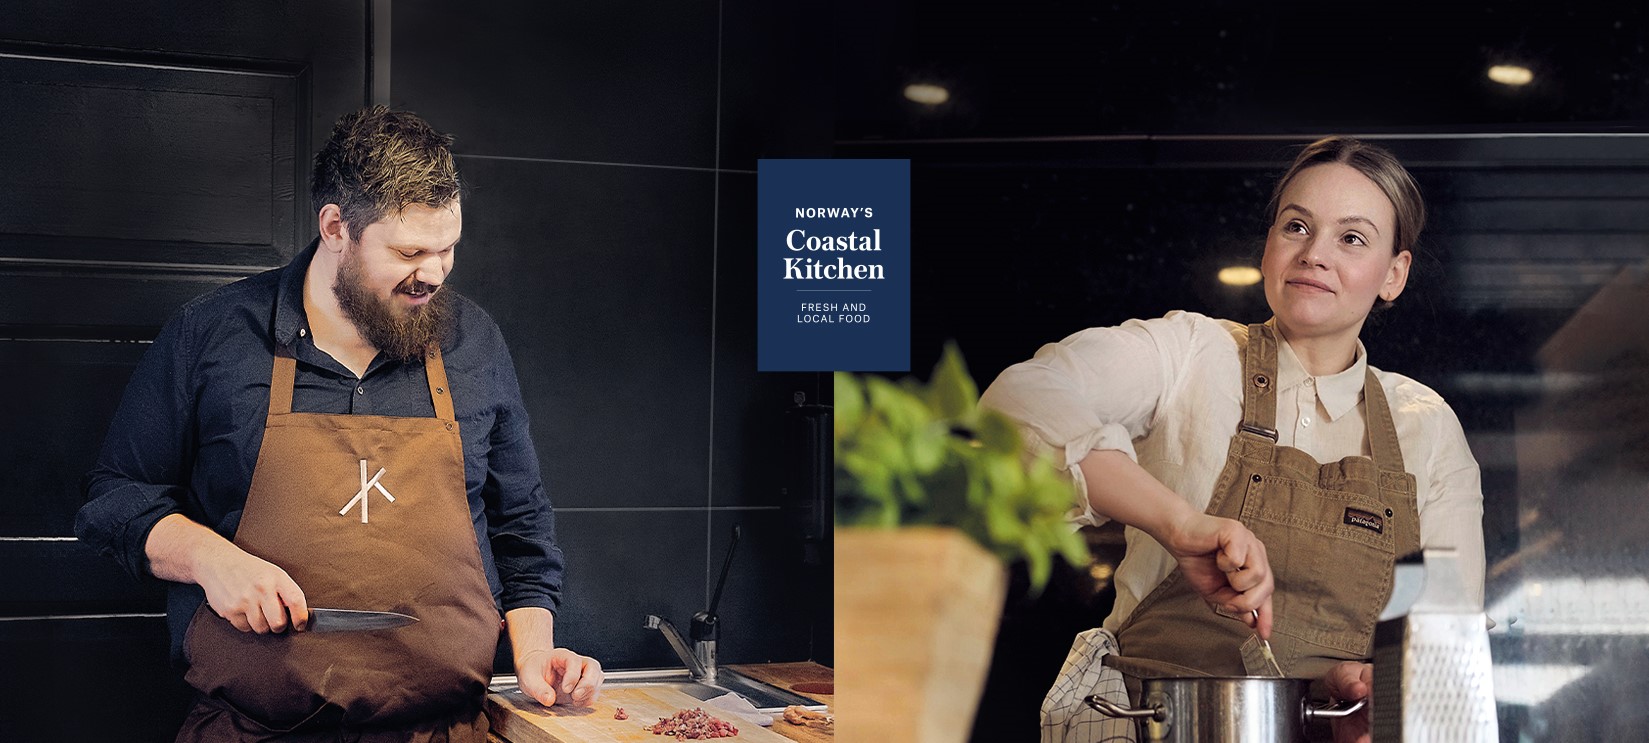 Our two Culinary ambassadors Ellingsen and Nässander in their kitchens.